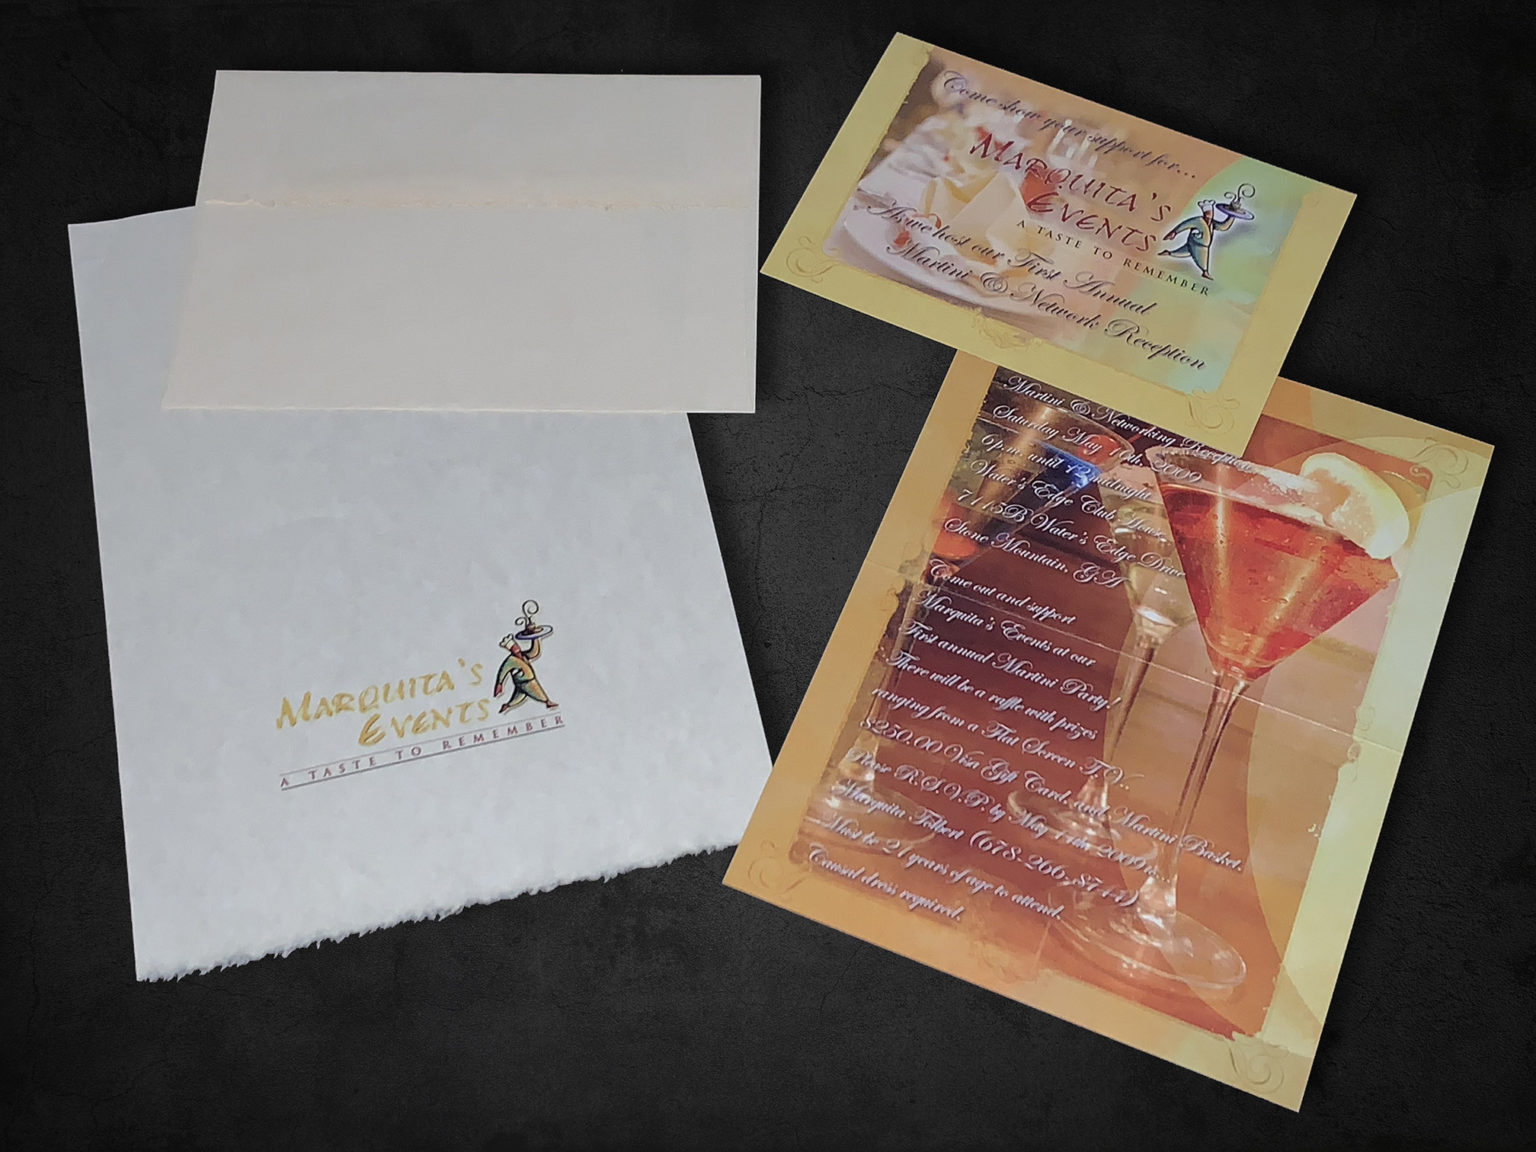 Marquita's Events - Brand Identity, Event Invitation • Designed by: Designs In Motion, Inc.